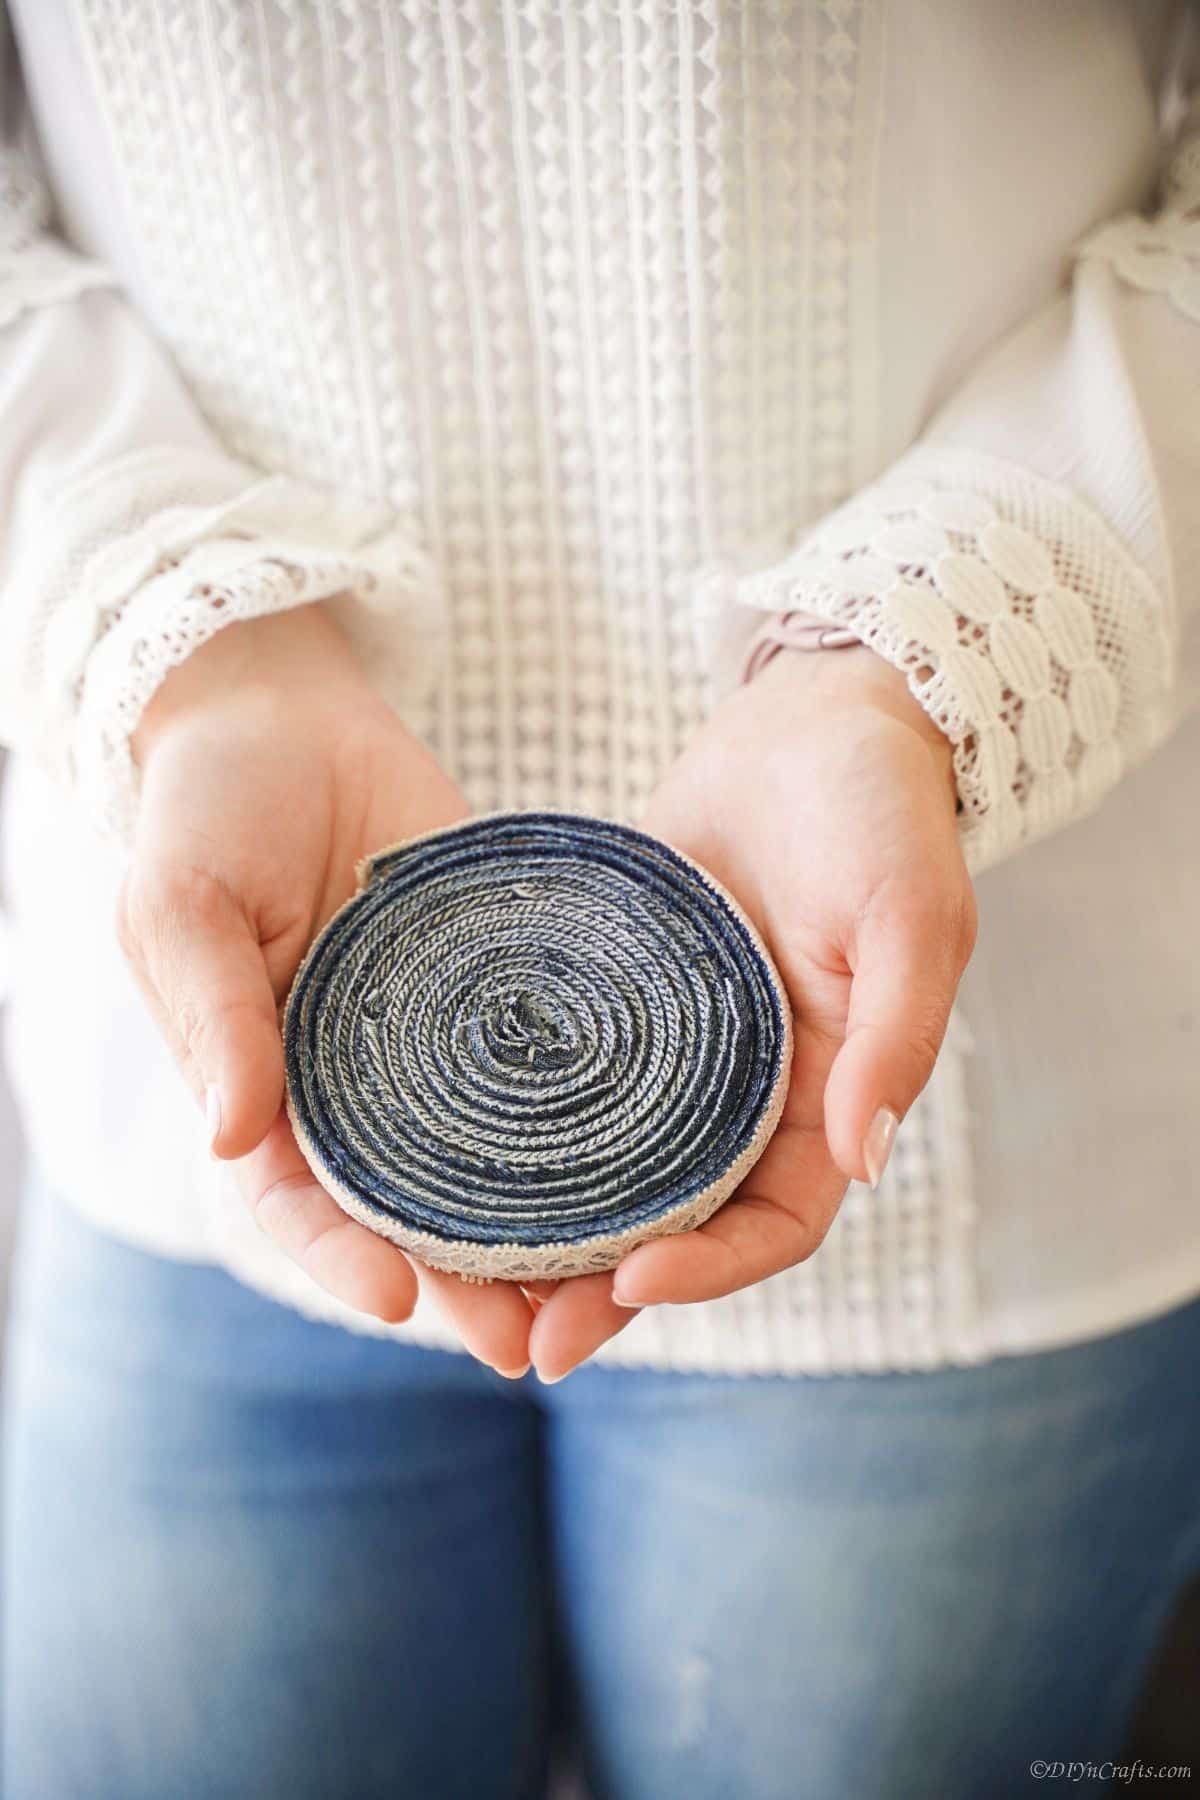 lady in white and jeans holding old blue jeans coaster in her hands